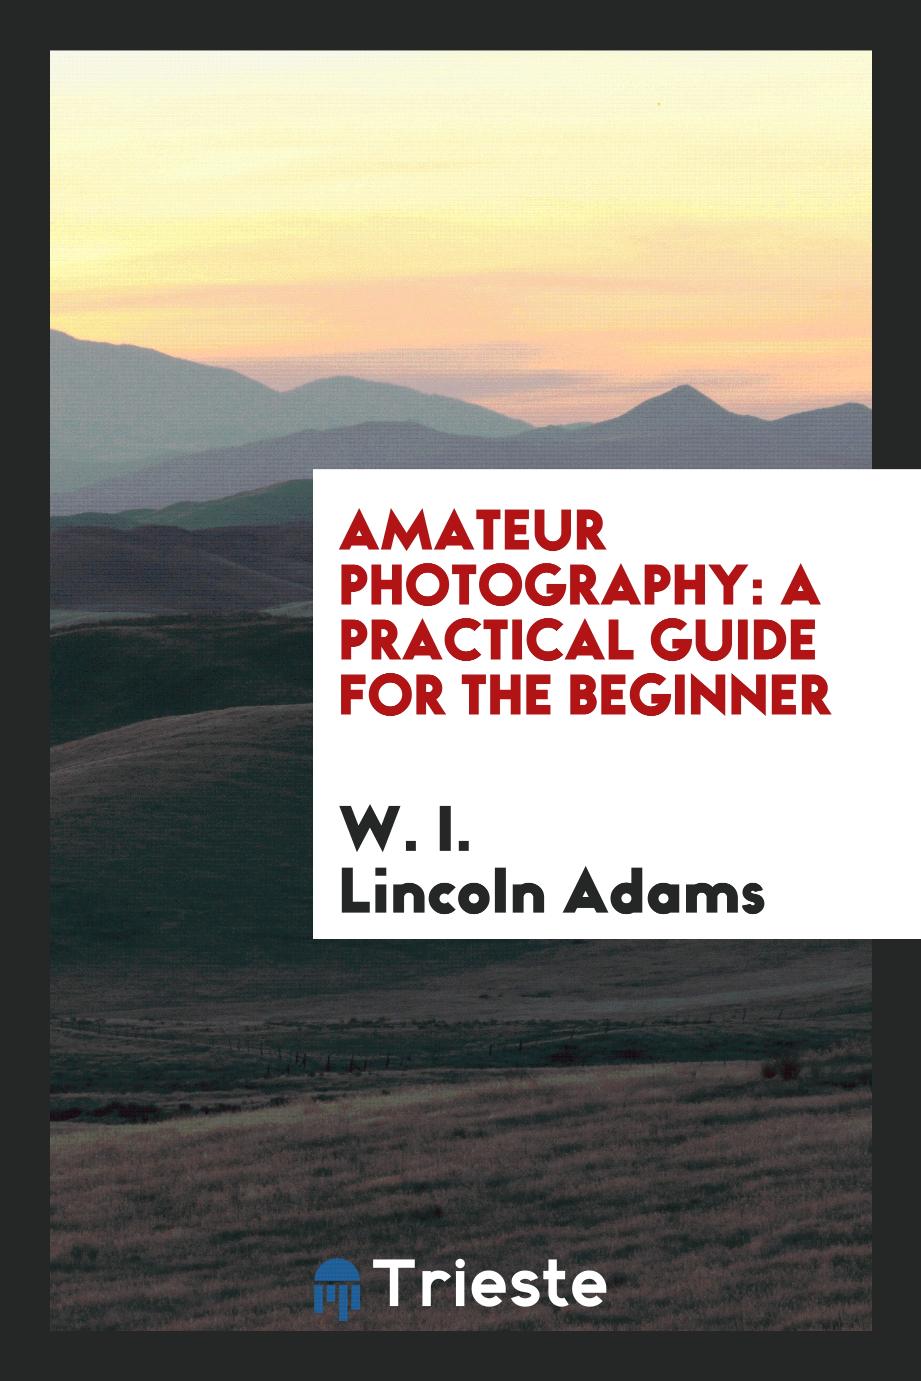 Amateur Photography: A PracticaL Guide for the Beginner